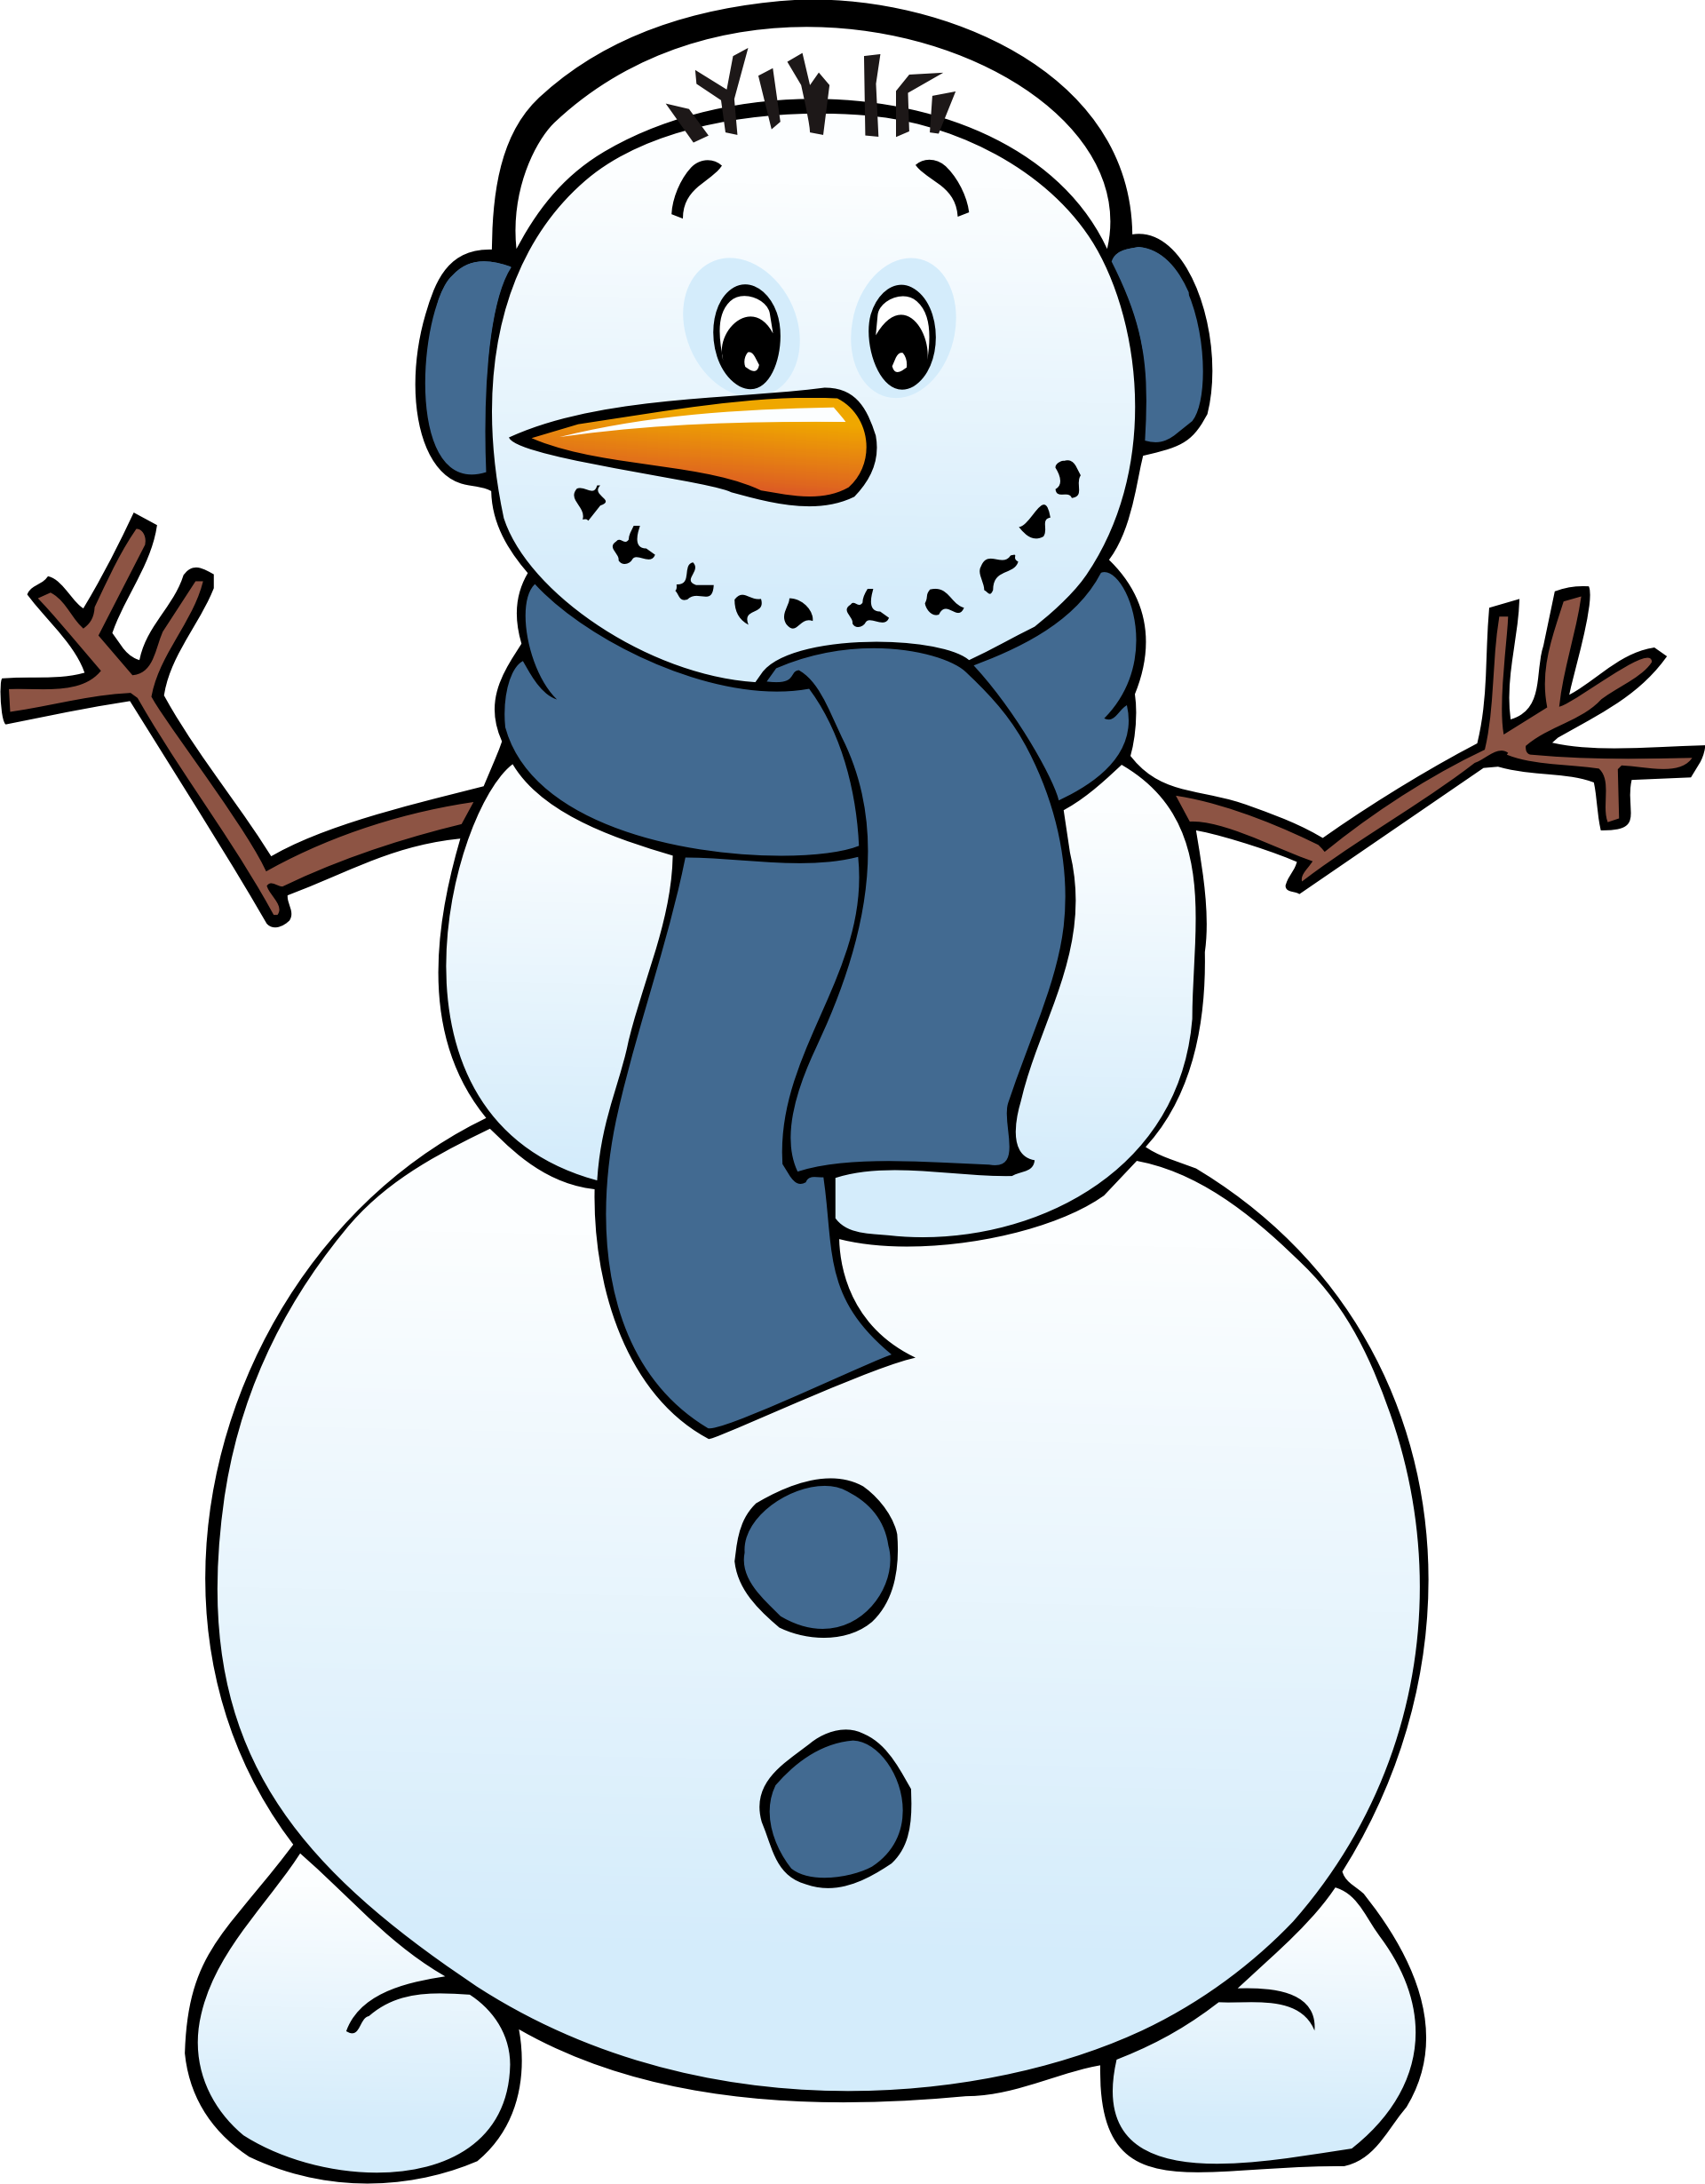 Animated snowman clipart free